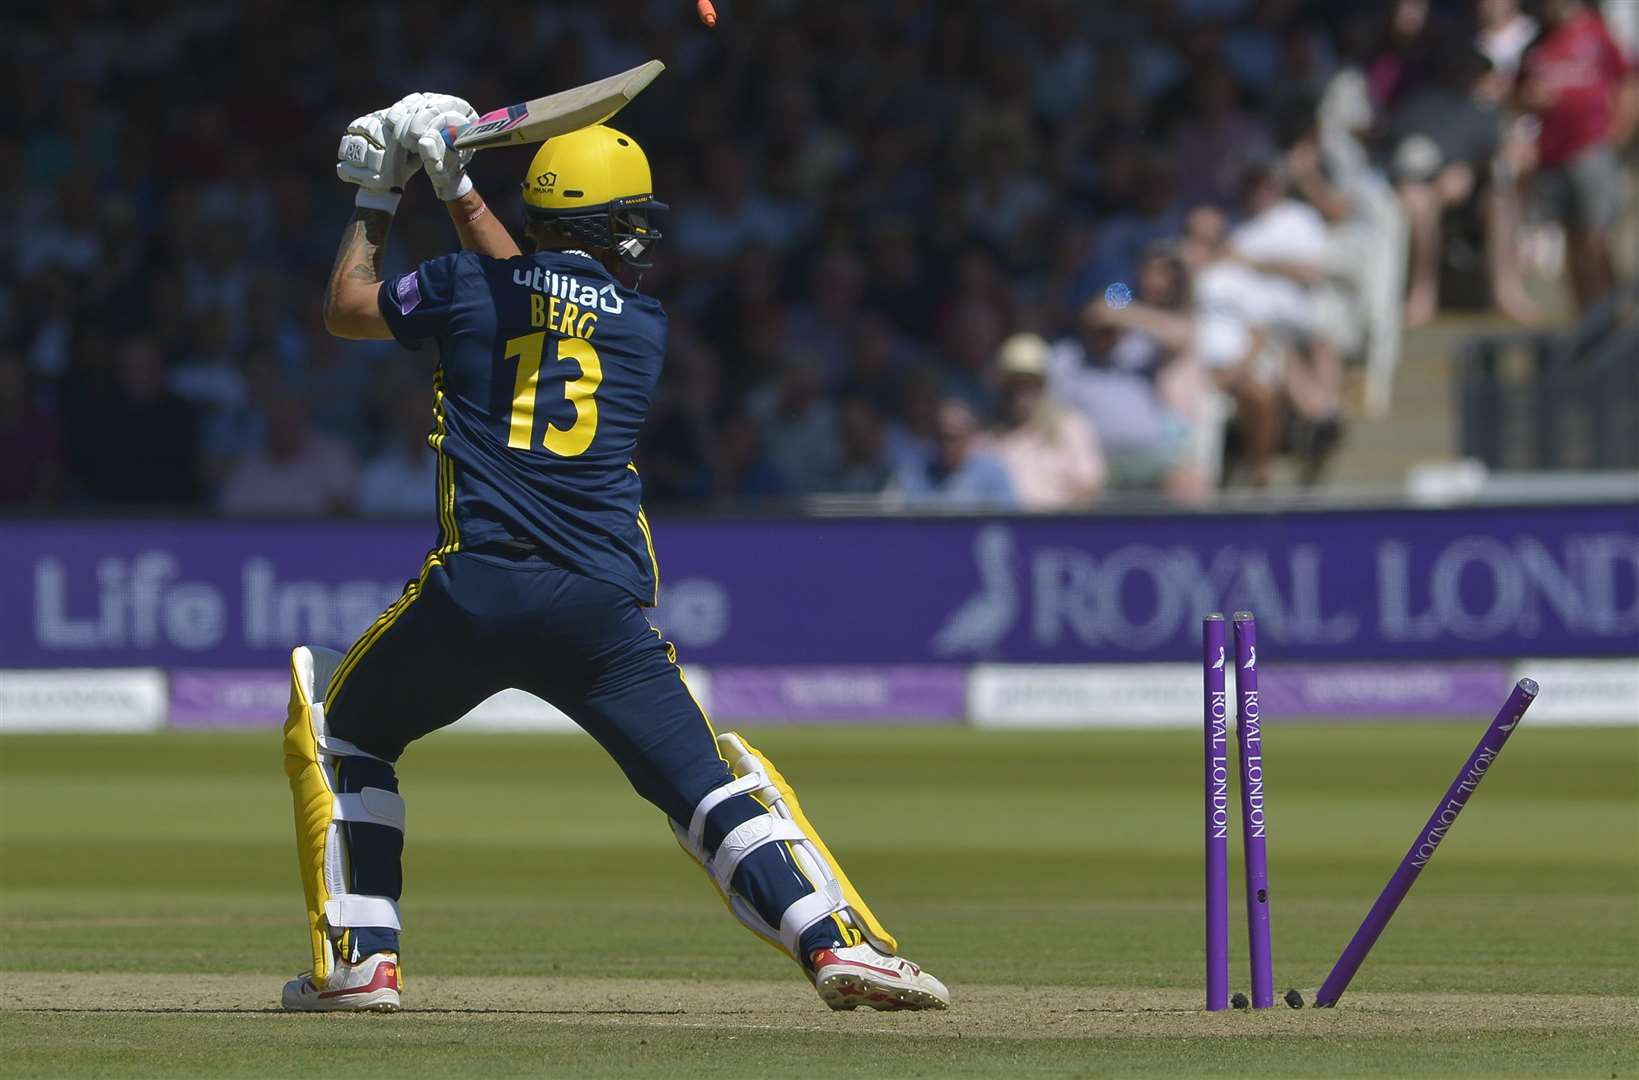 Hampshire 's Gareth Berg is bowled by Calum Haggett Picture: Ady Kerry